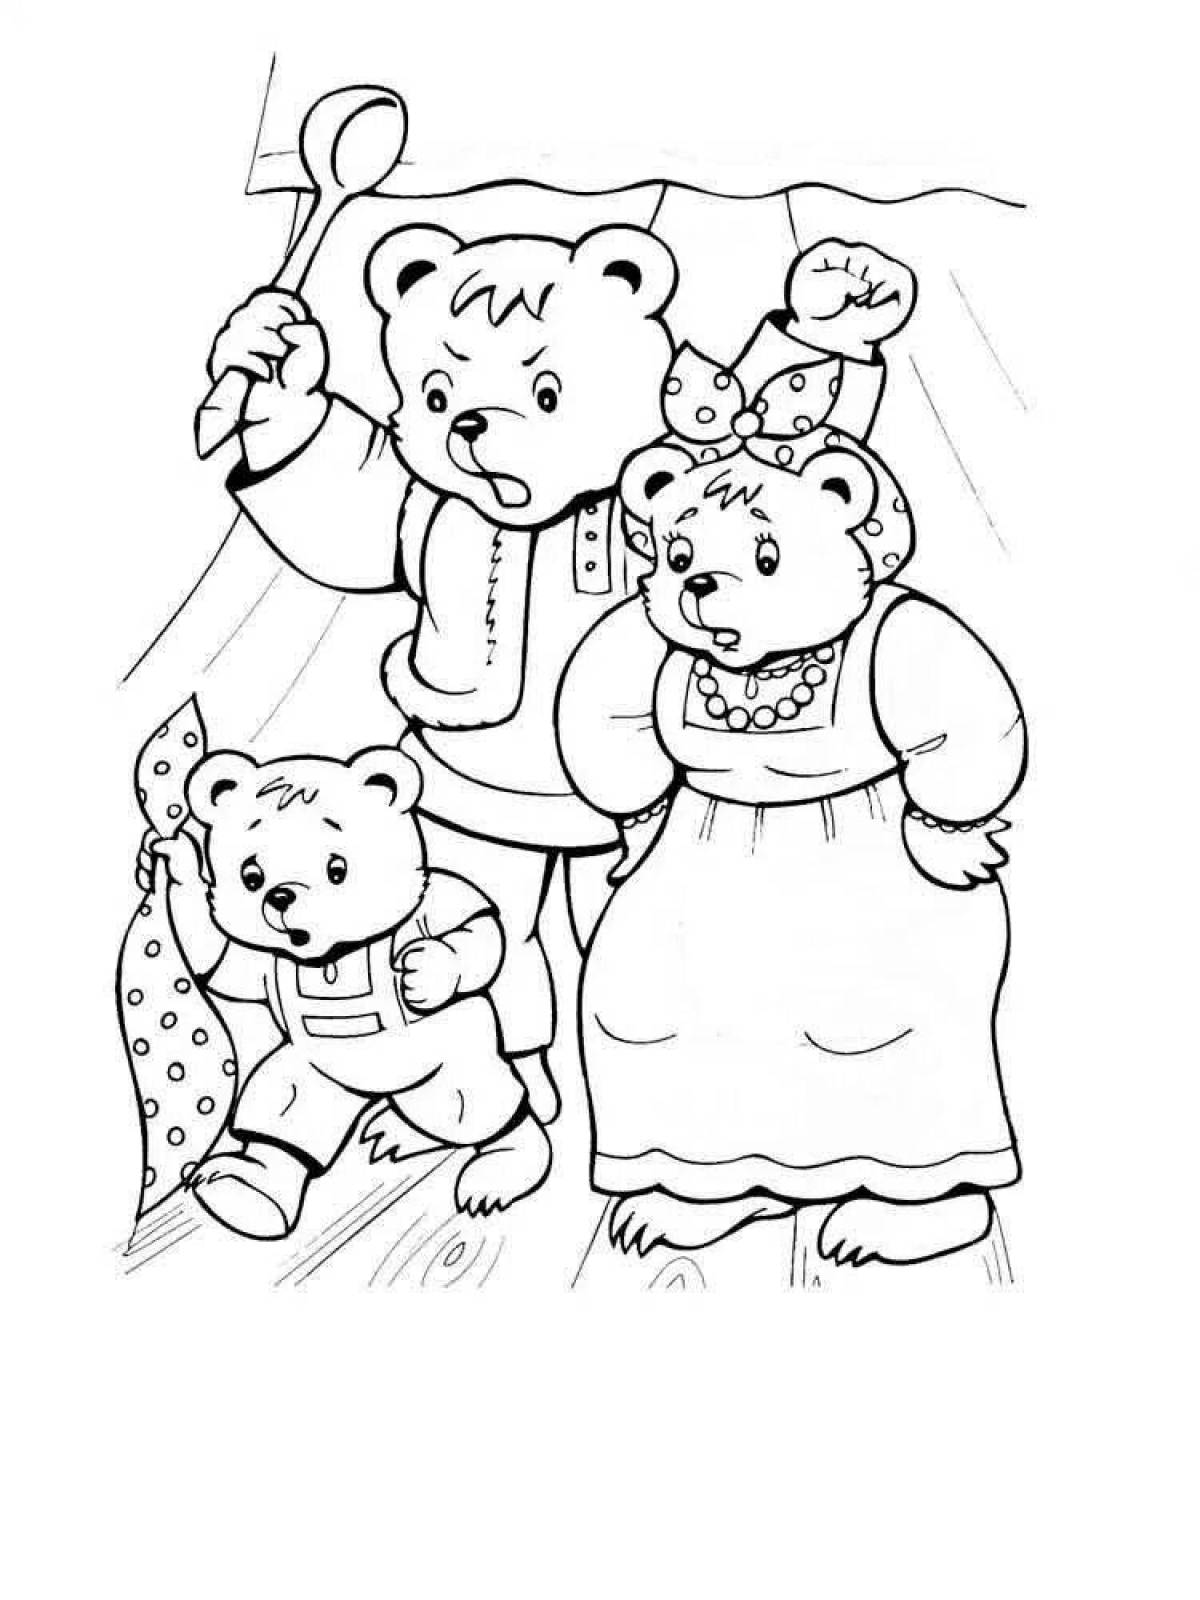 Exquisite coloring book for children 3-4 years old Russian folk tales